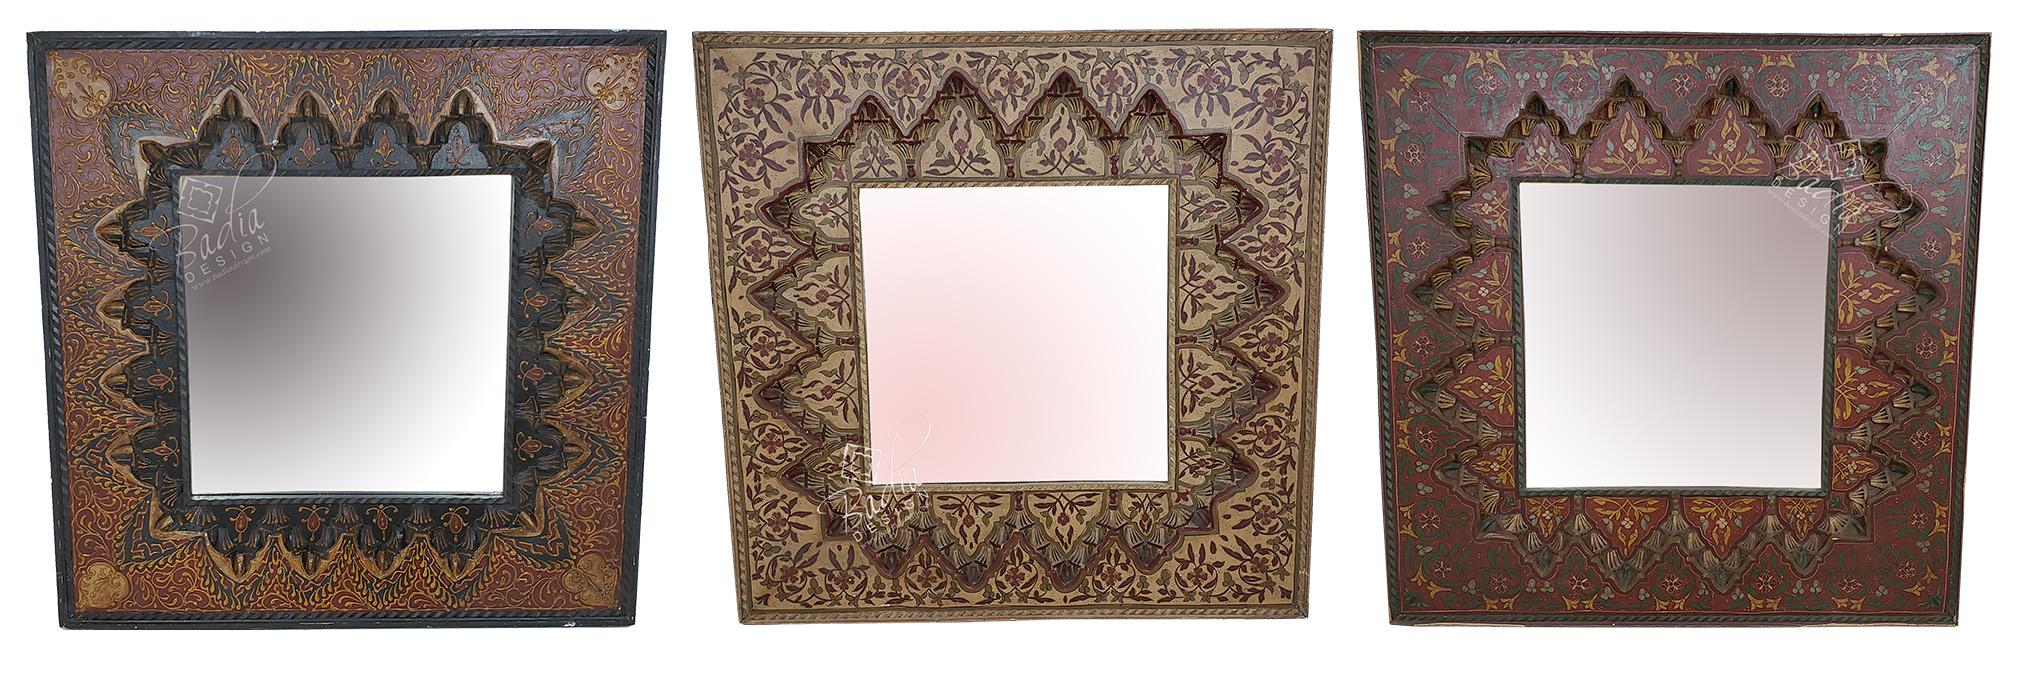 moroccan-vintage-hand-painted-wooden-mirrors-m-w014.jpg